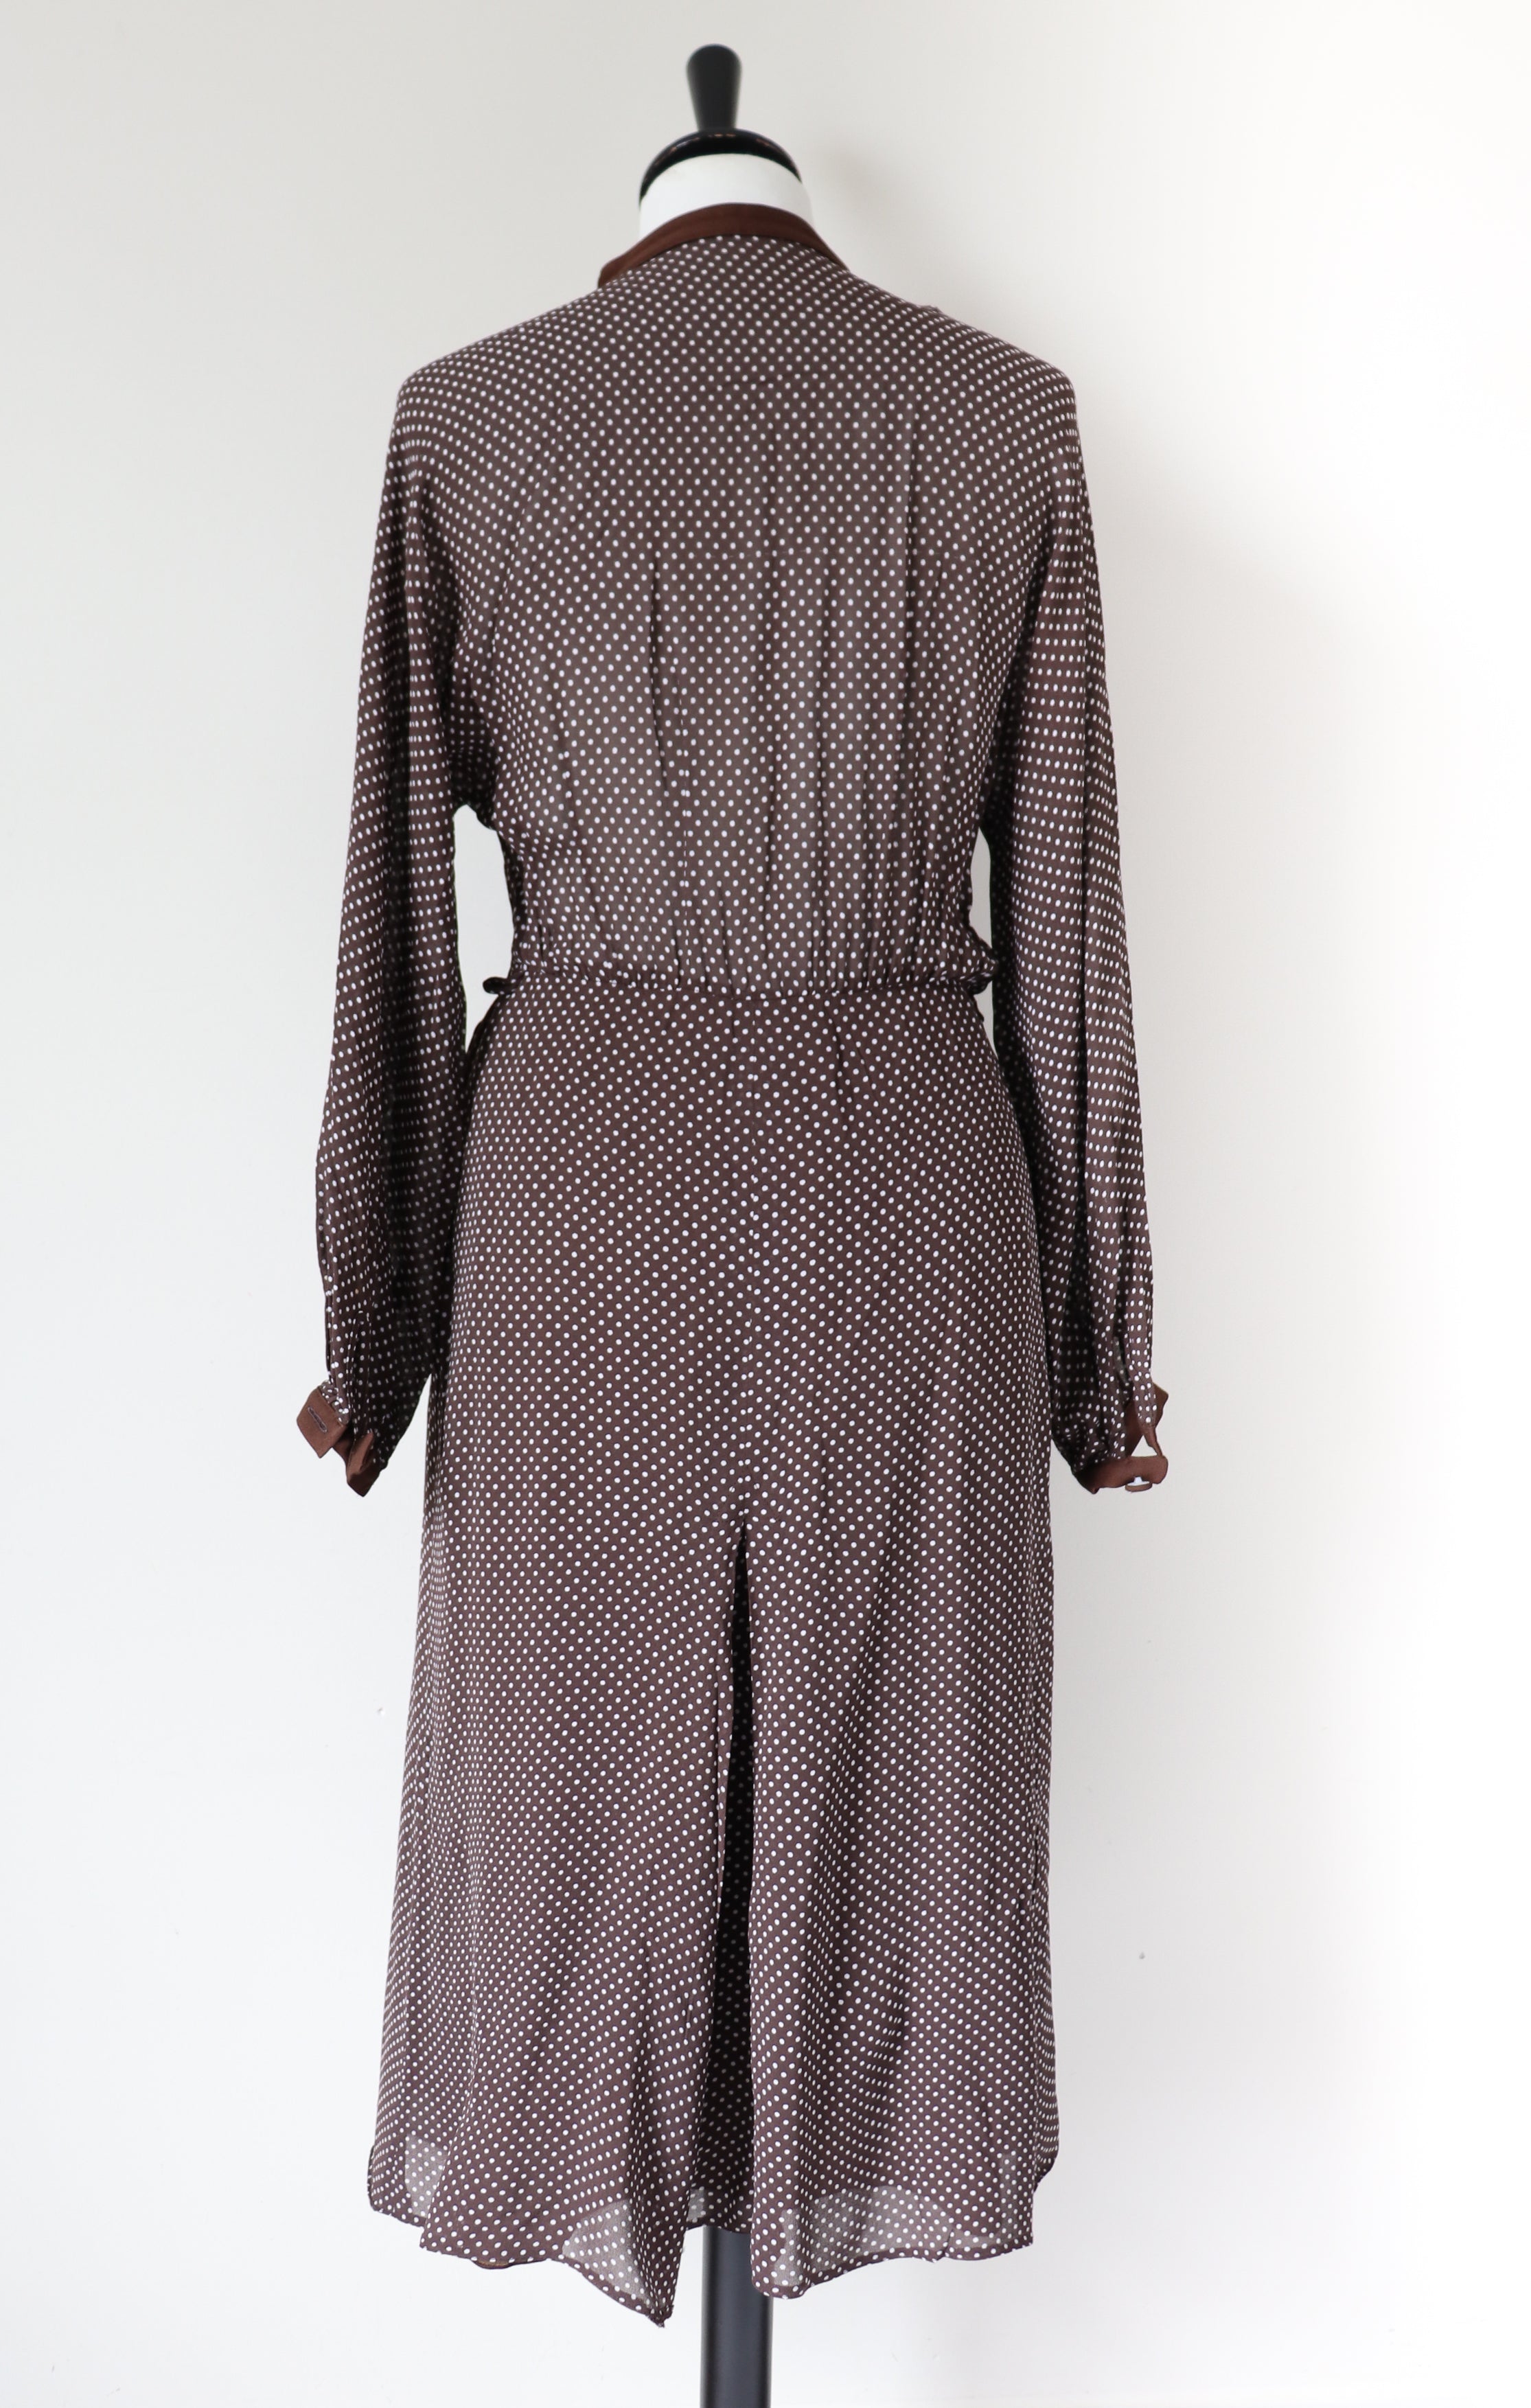 Brown Spotted 1990s Dress - 1940s Style - Long Sleeves - Polyester Chiffon - S / M - UK 10 / 12